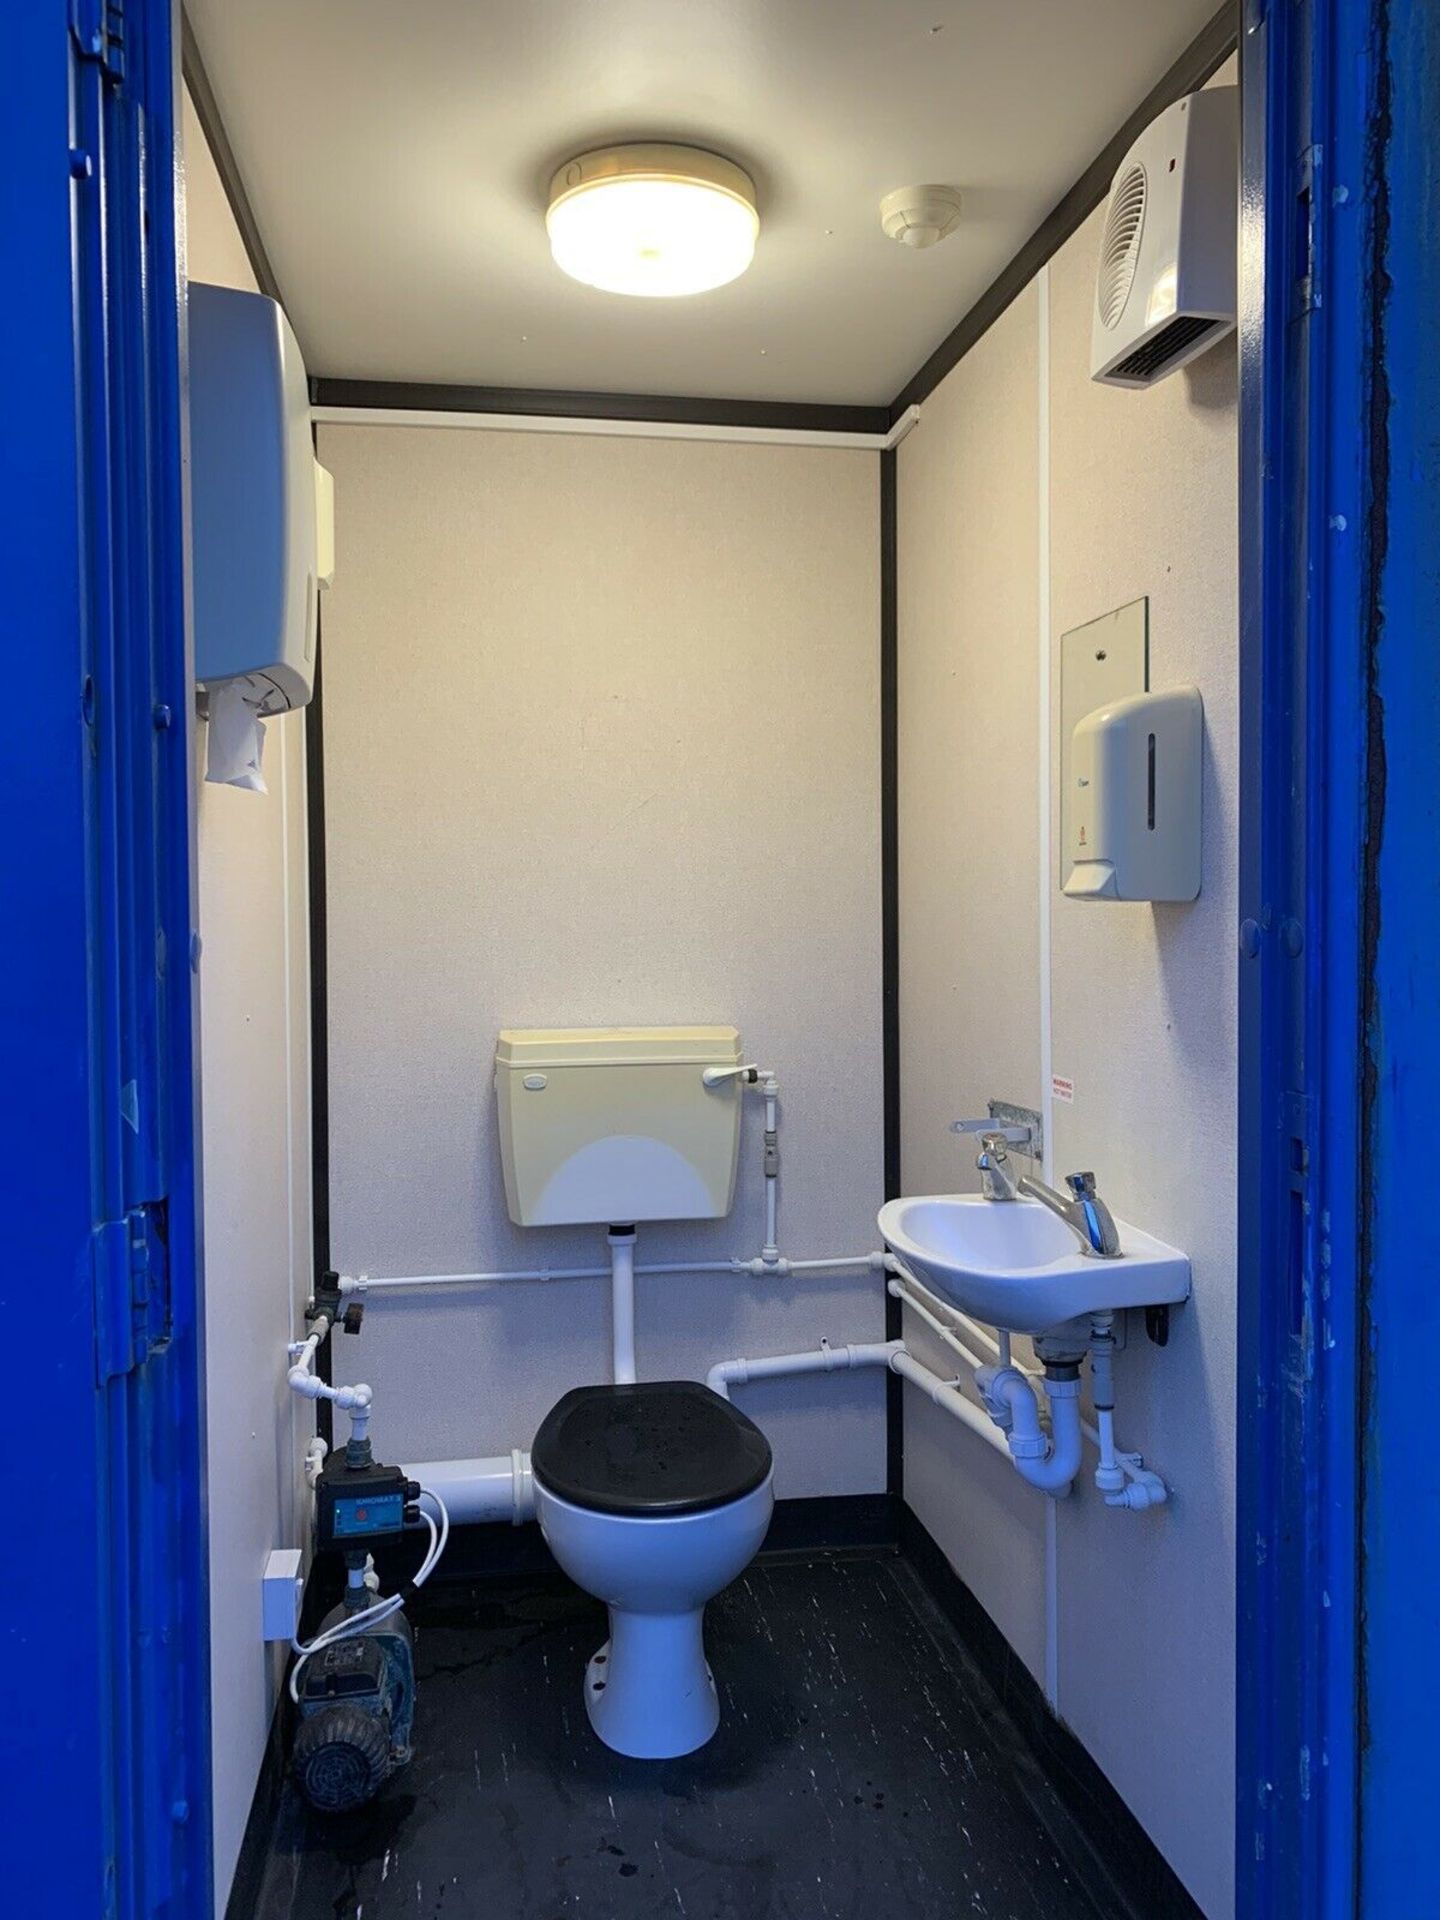 Welfare Unit Site Office Portable Cabin Canteen Toilet - Image 9 of 10